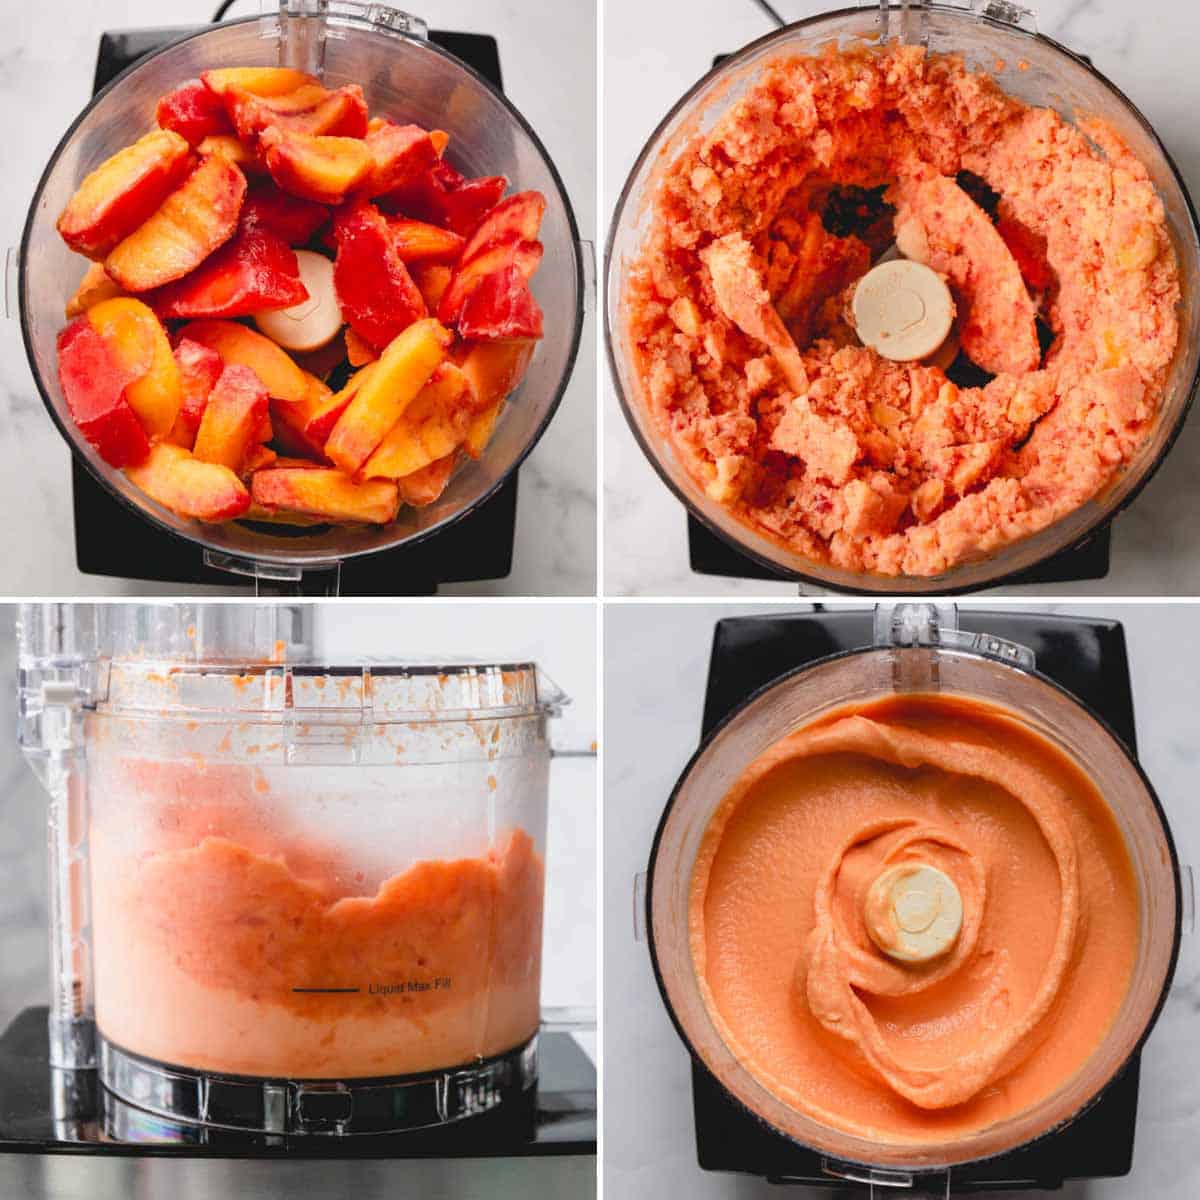 Step by step images of making peach ice cream in a food processor.